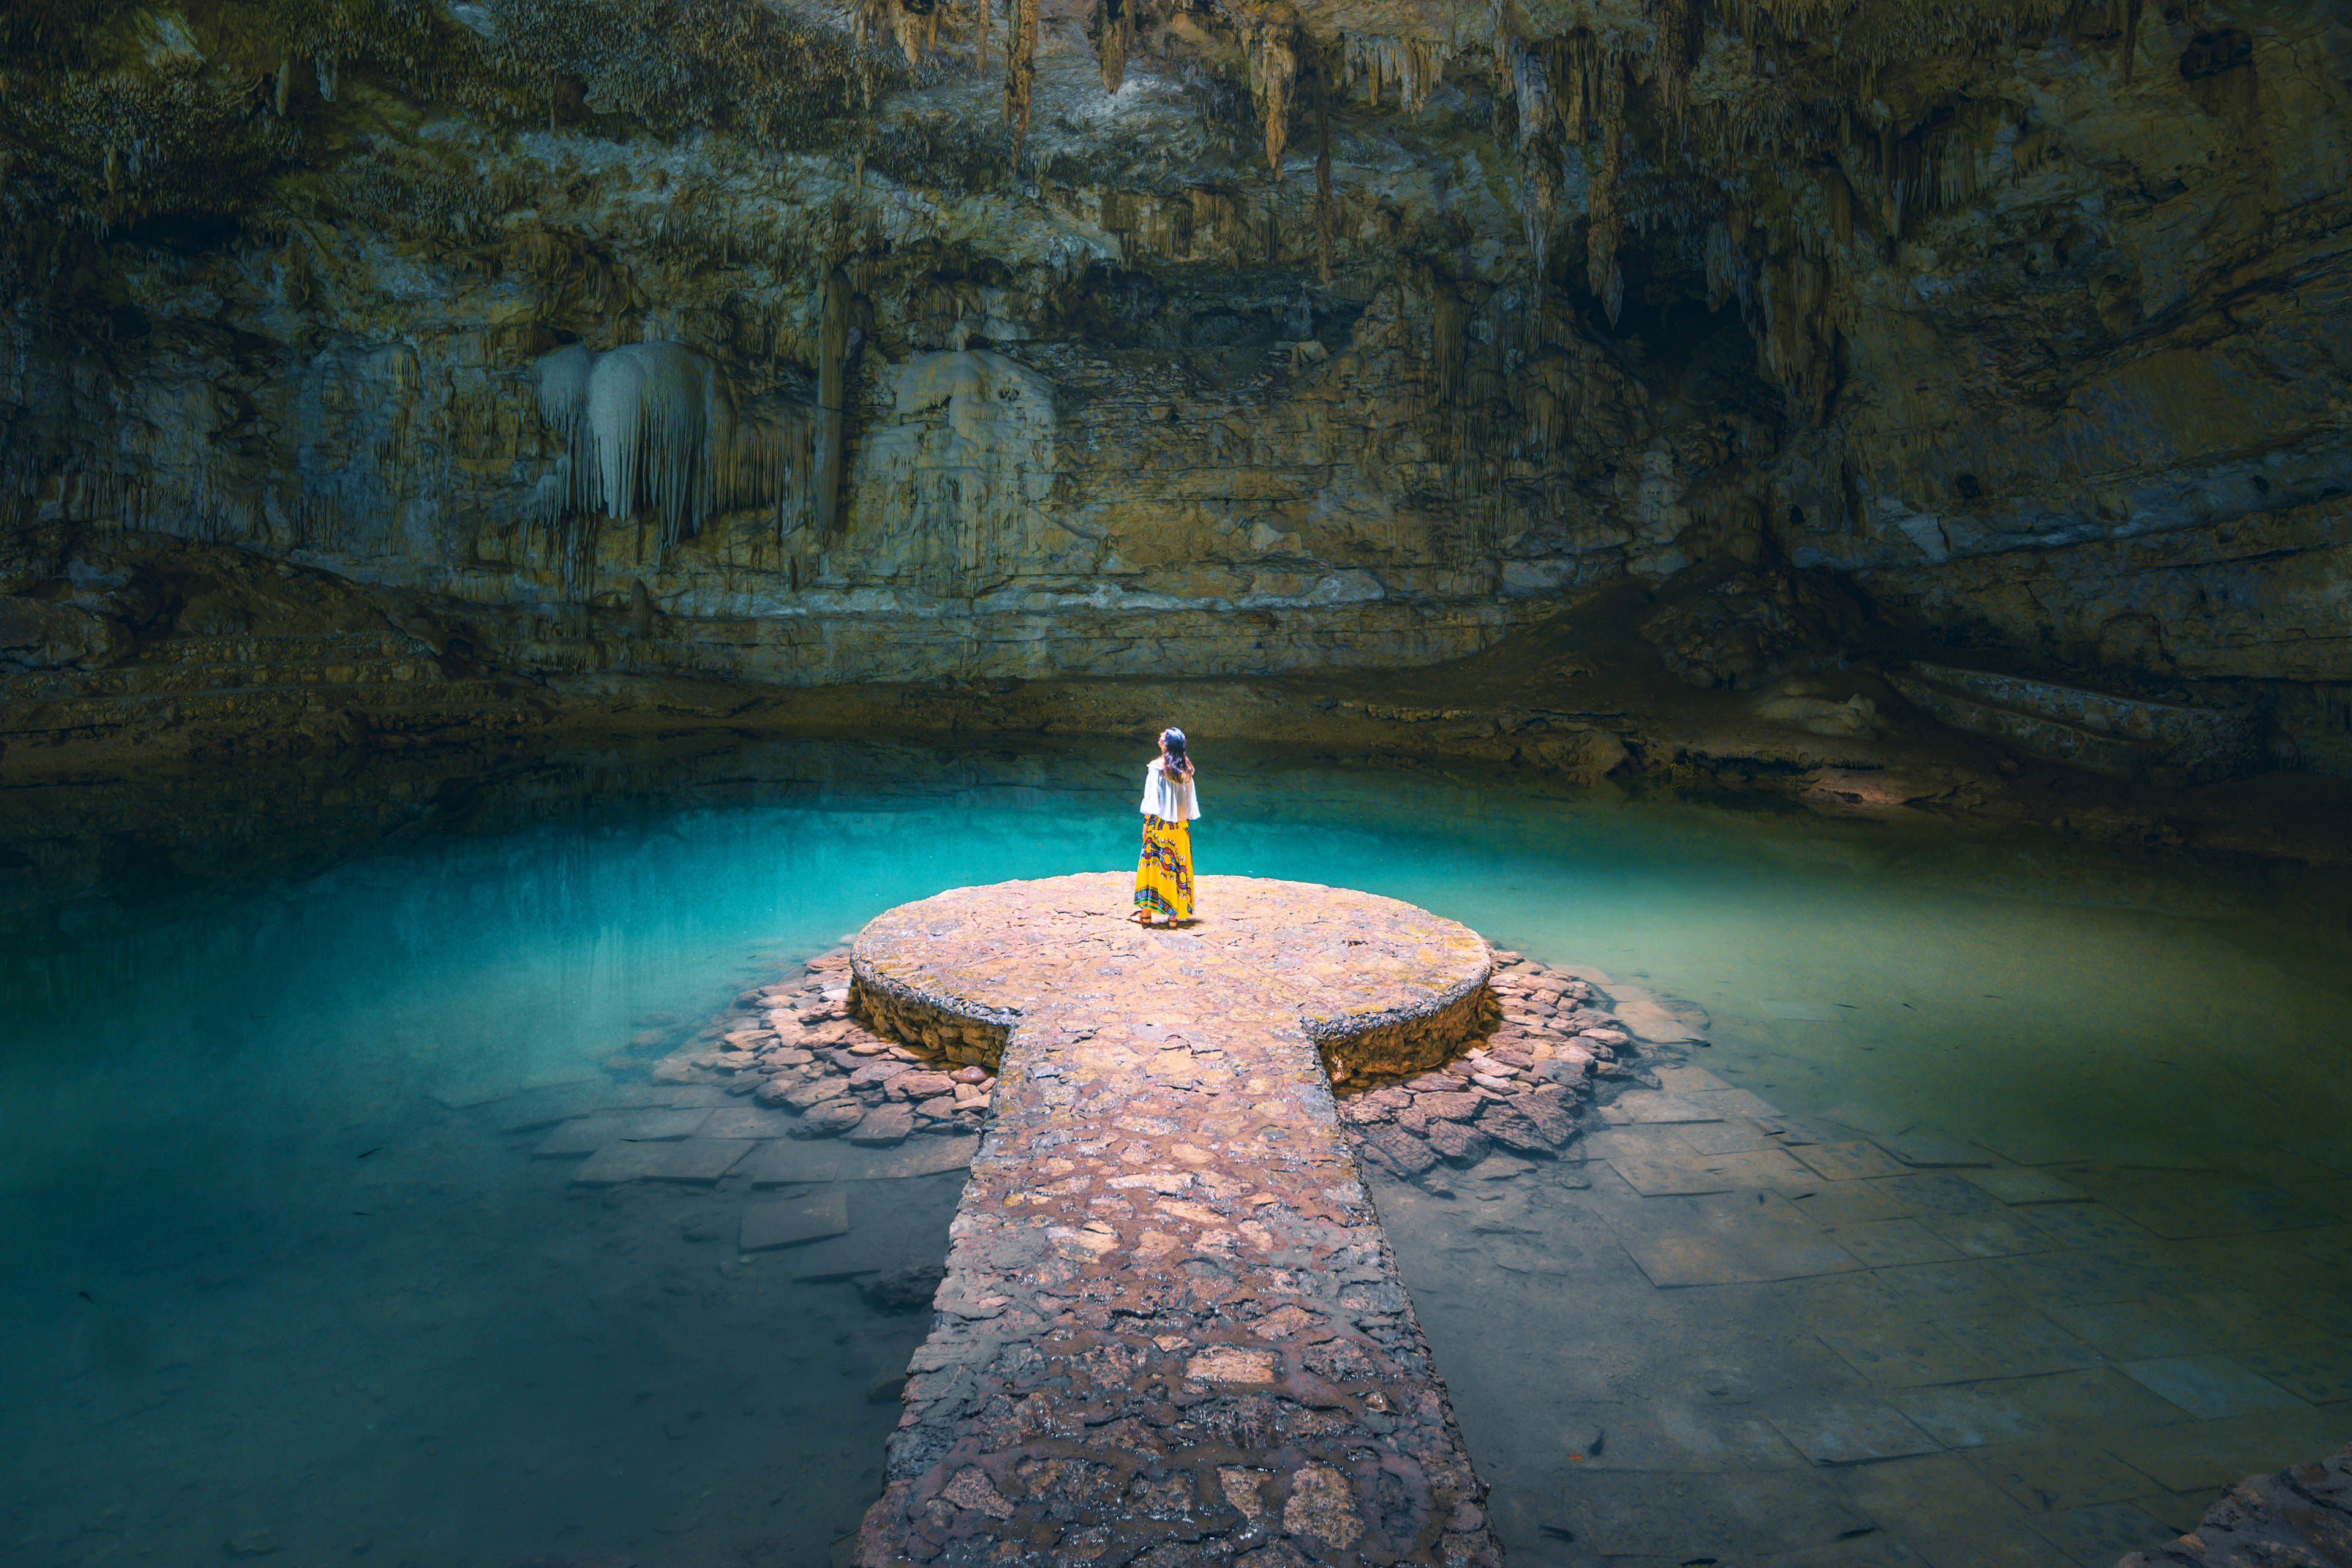 Woman-standing-alone-in-a-cenote